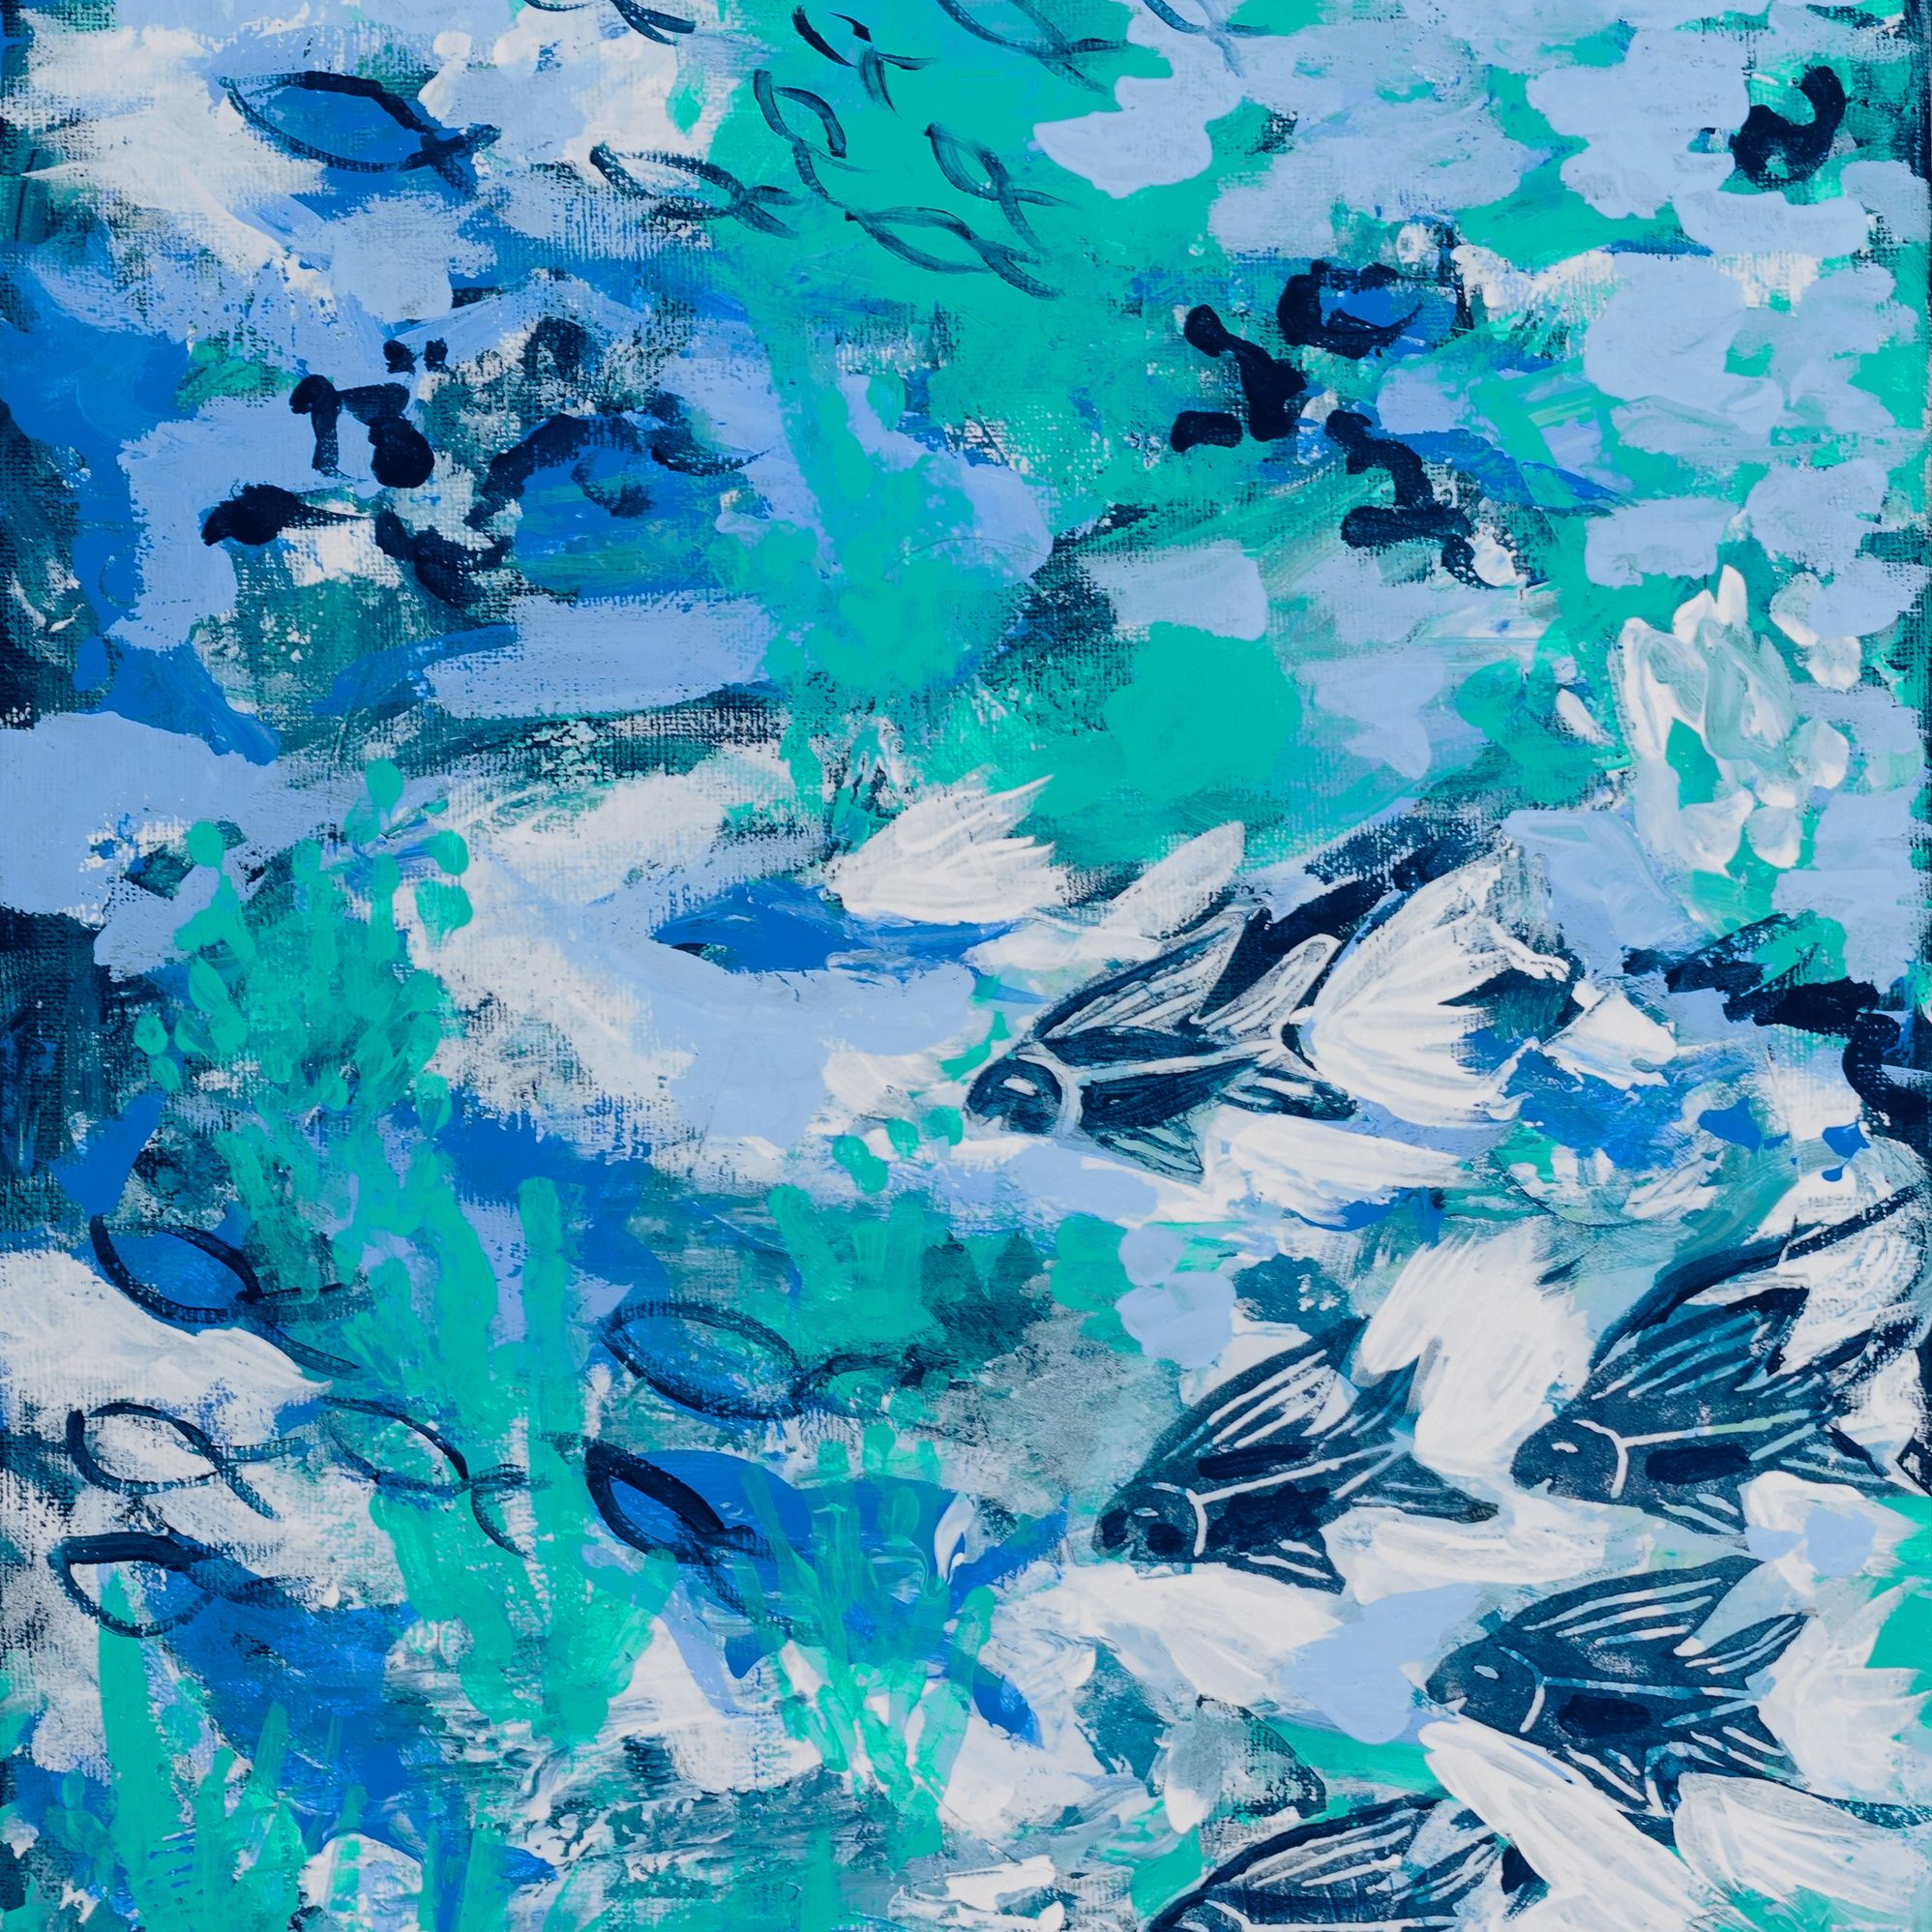 Abstract Art, Abstract Painting, Ocean Abstract Art, Blue Abstract Art, Blue Ocean Art